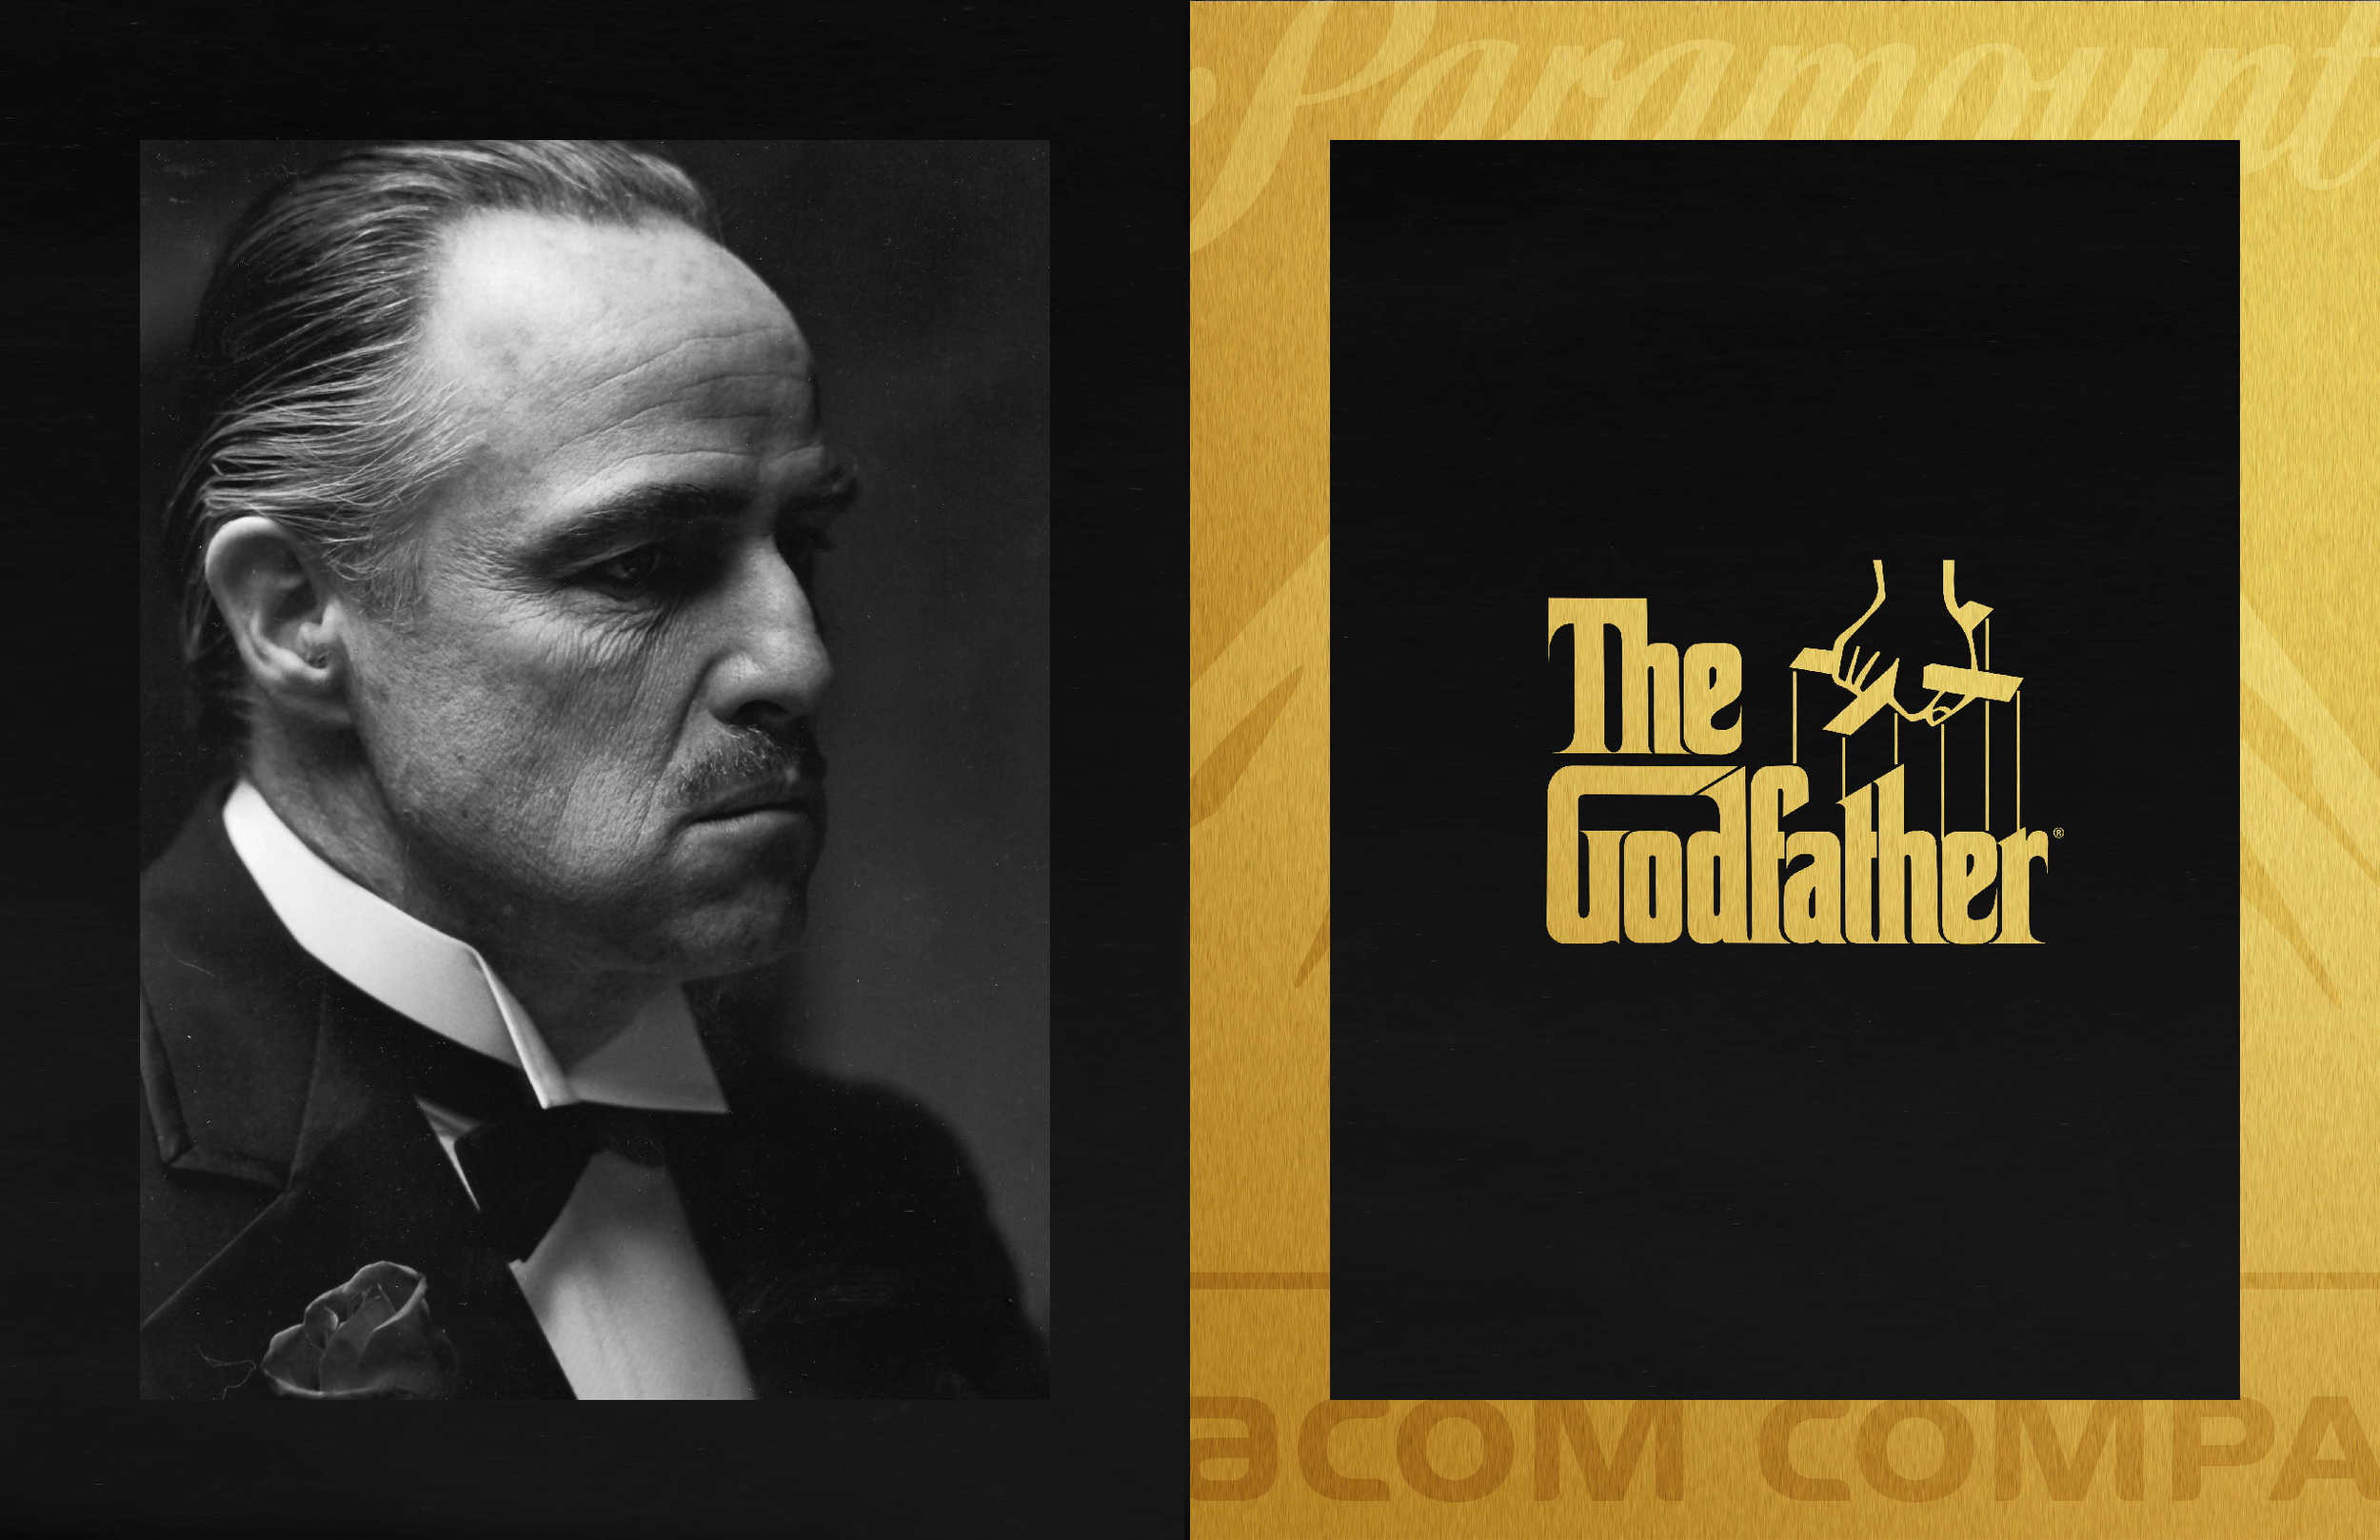 Godfather_SG_New_Page_01.png